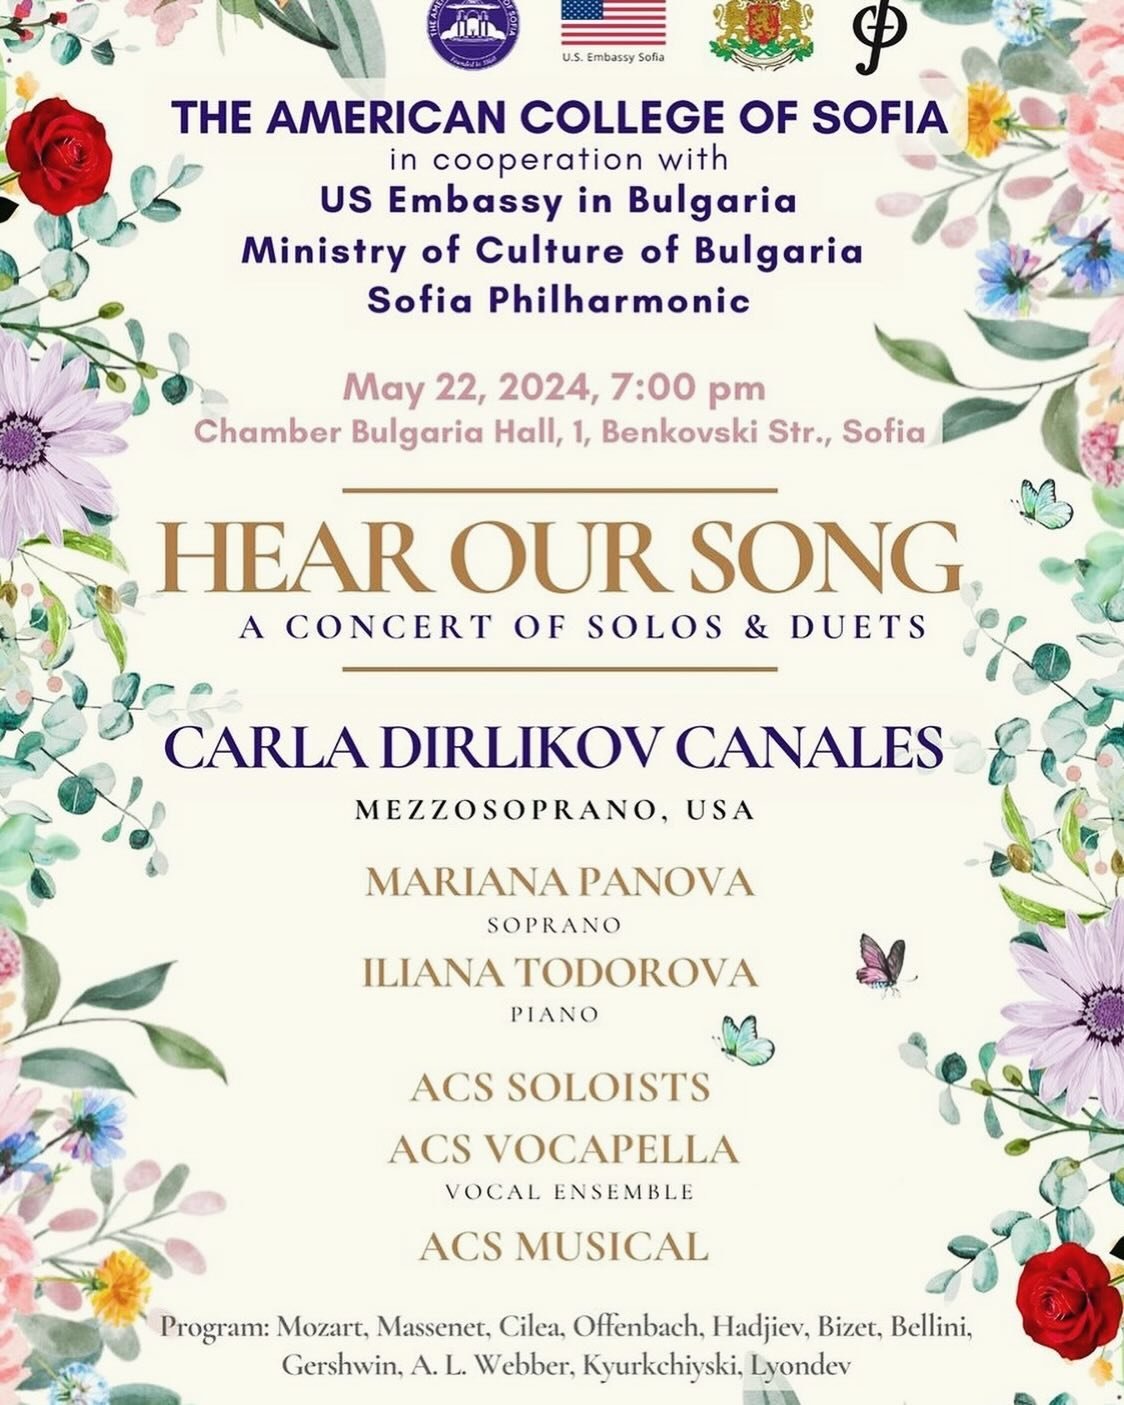 Excited to share that I will be in Sofia, Bulgaria next week to offer a commencement address for the @americancollegeofsofia graduation and also to perform with soprano, Mariana Panova, and pianist Iliana Todorova, in a Concert of Solos and Duets - H